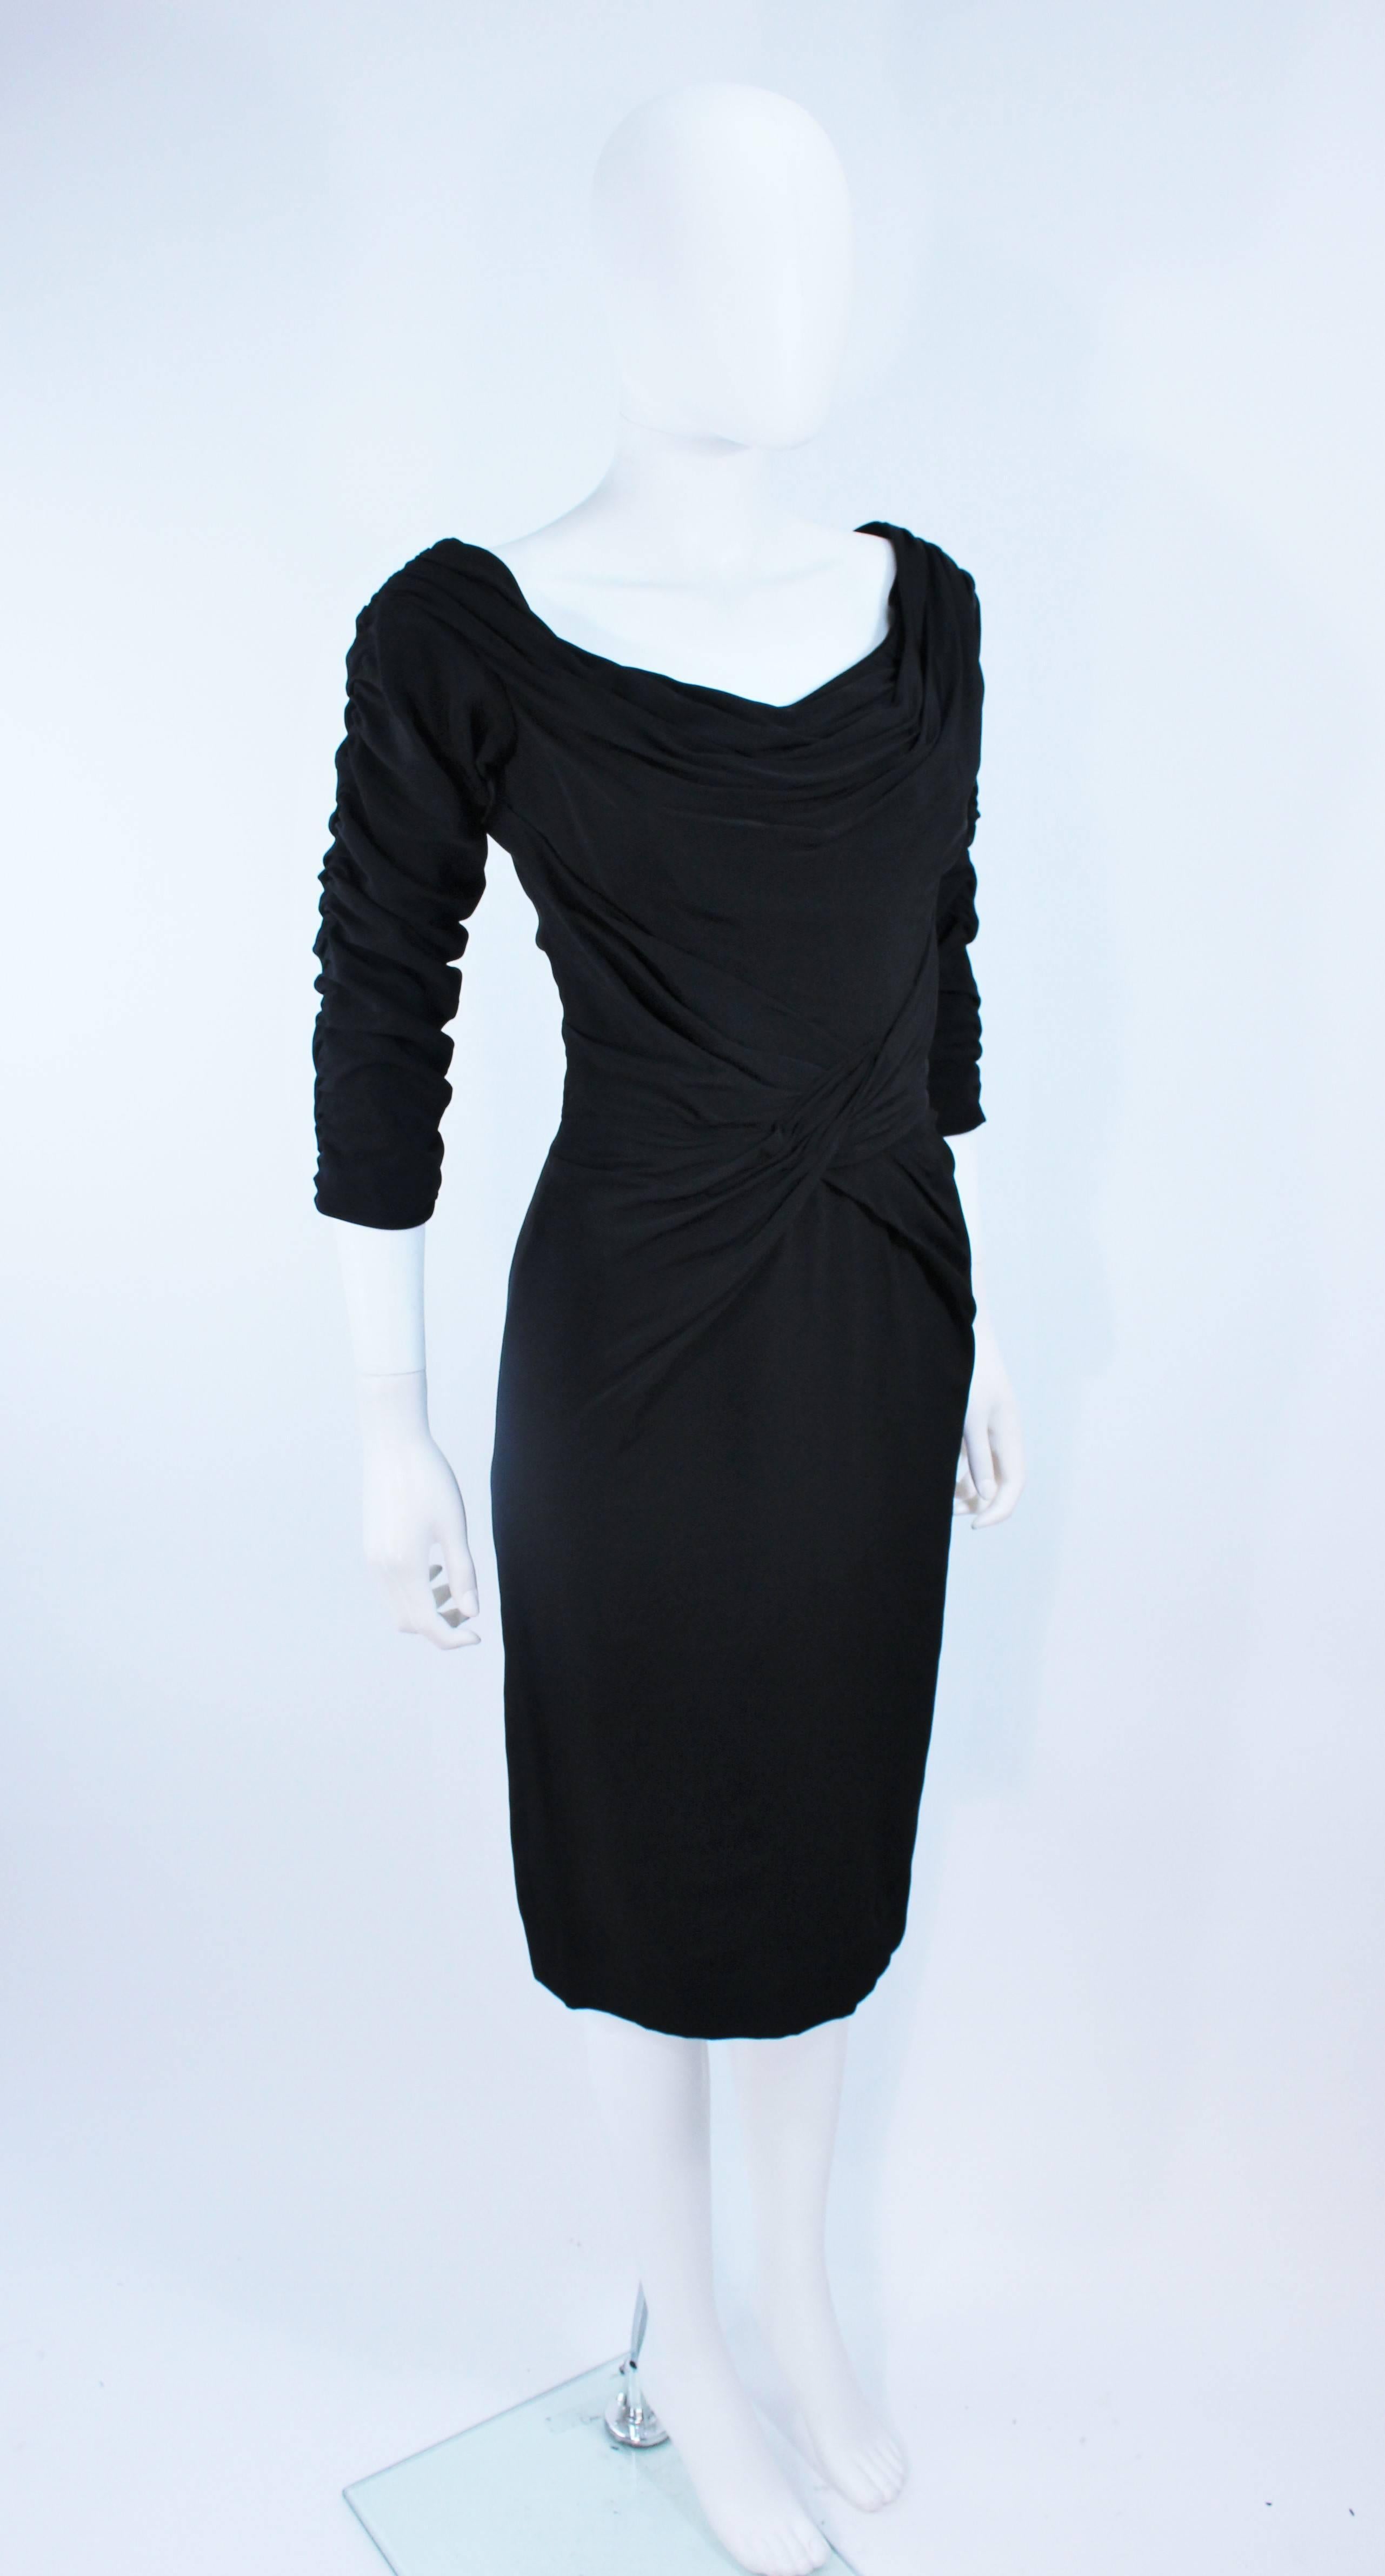 CEIL CHAPMAN Black Gathered Cocktail Dress Size 4 6  In Excellent Condition For Sale In Los Angeles, CA